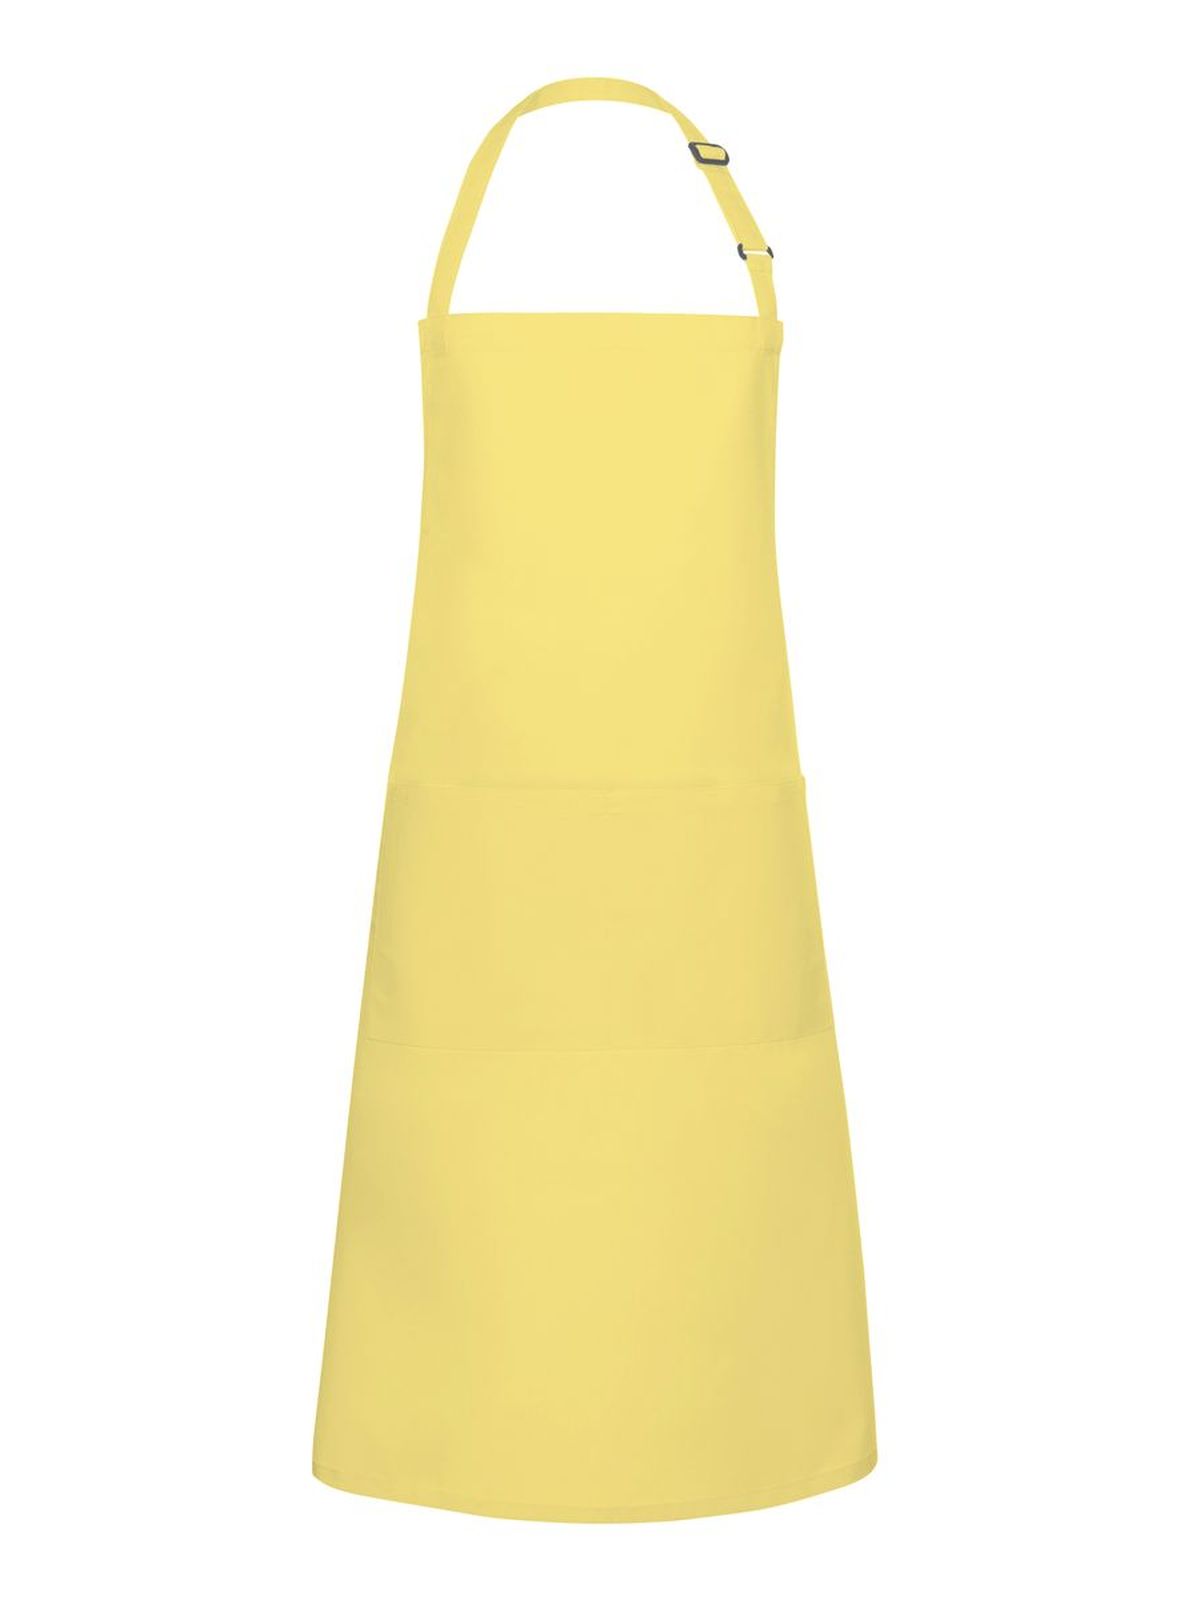 bistro-apron-basic-with-buckle-and-pocket-sunny-yellow.webp